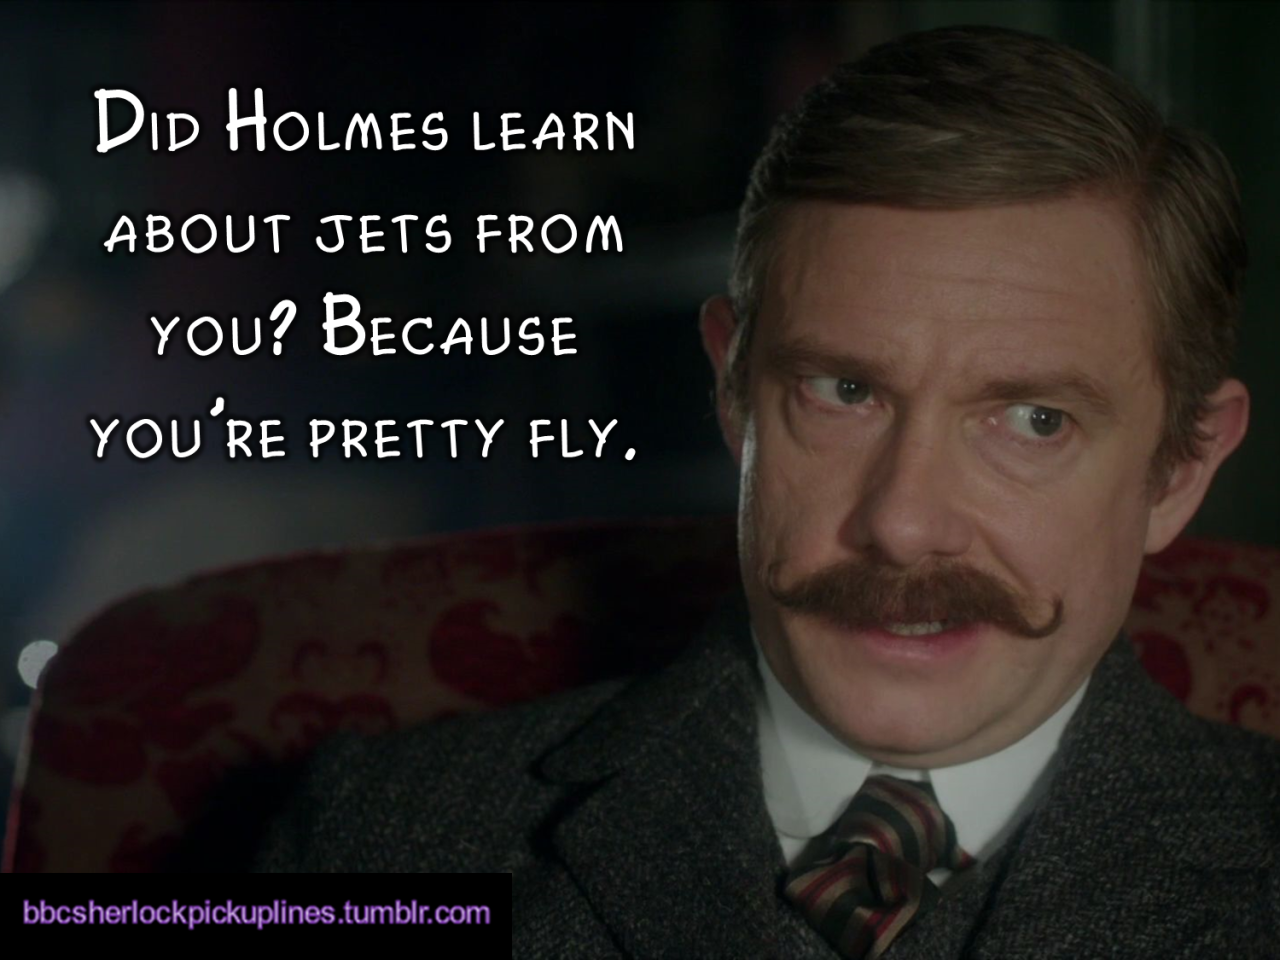 â€œDid Holmes learn about jets from you? Because youâ€™re pretty fly.â€